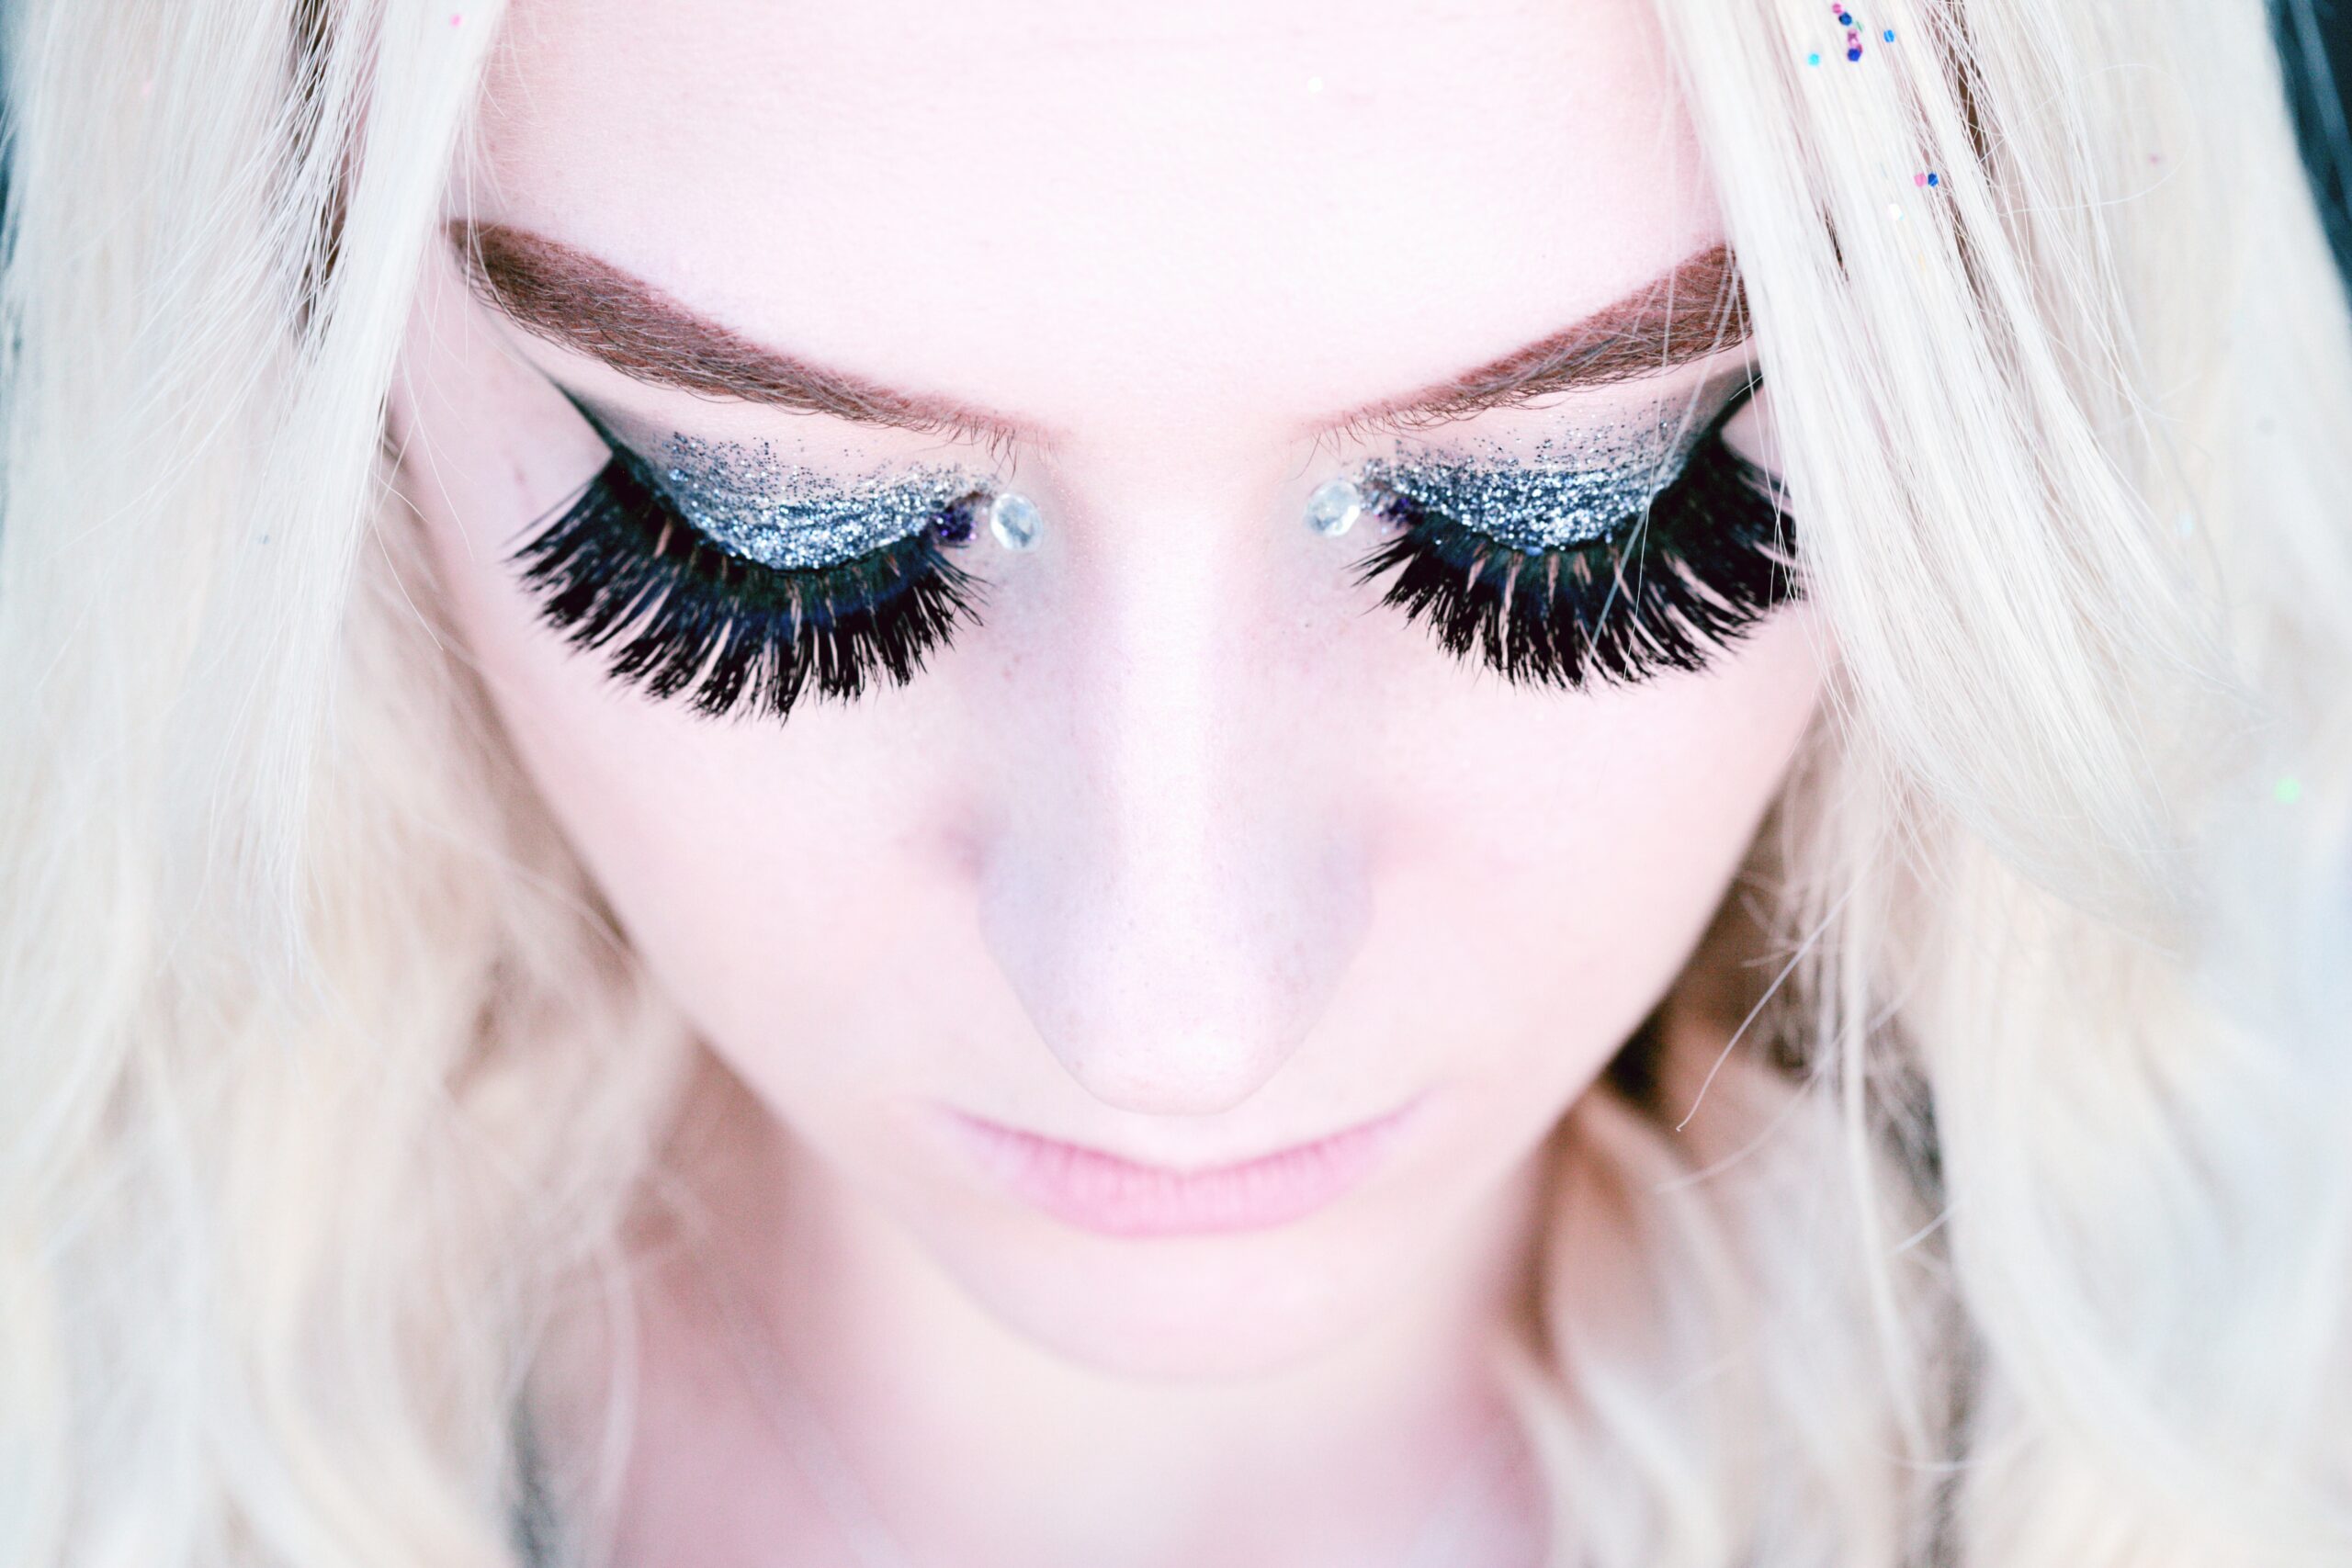 Can You Share Insights On Creating A Seamless Transition From Natural Lashes To False Eyelashes?